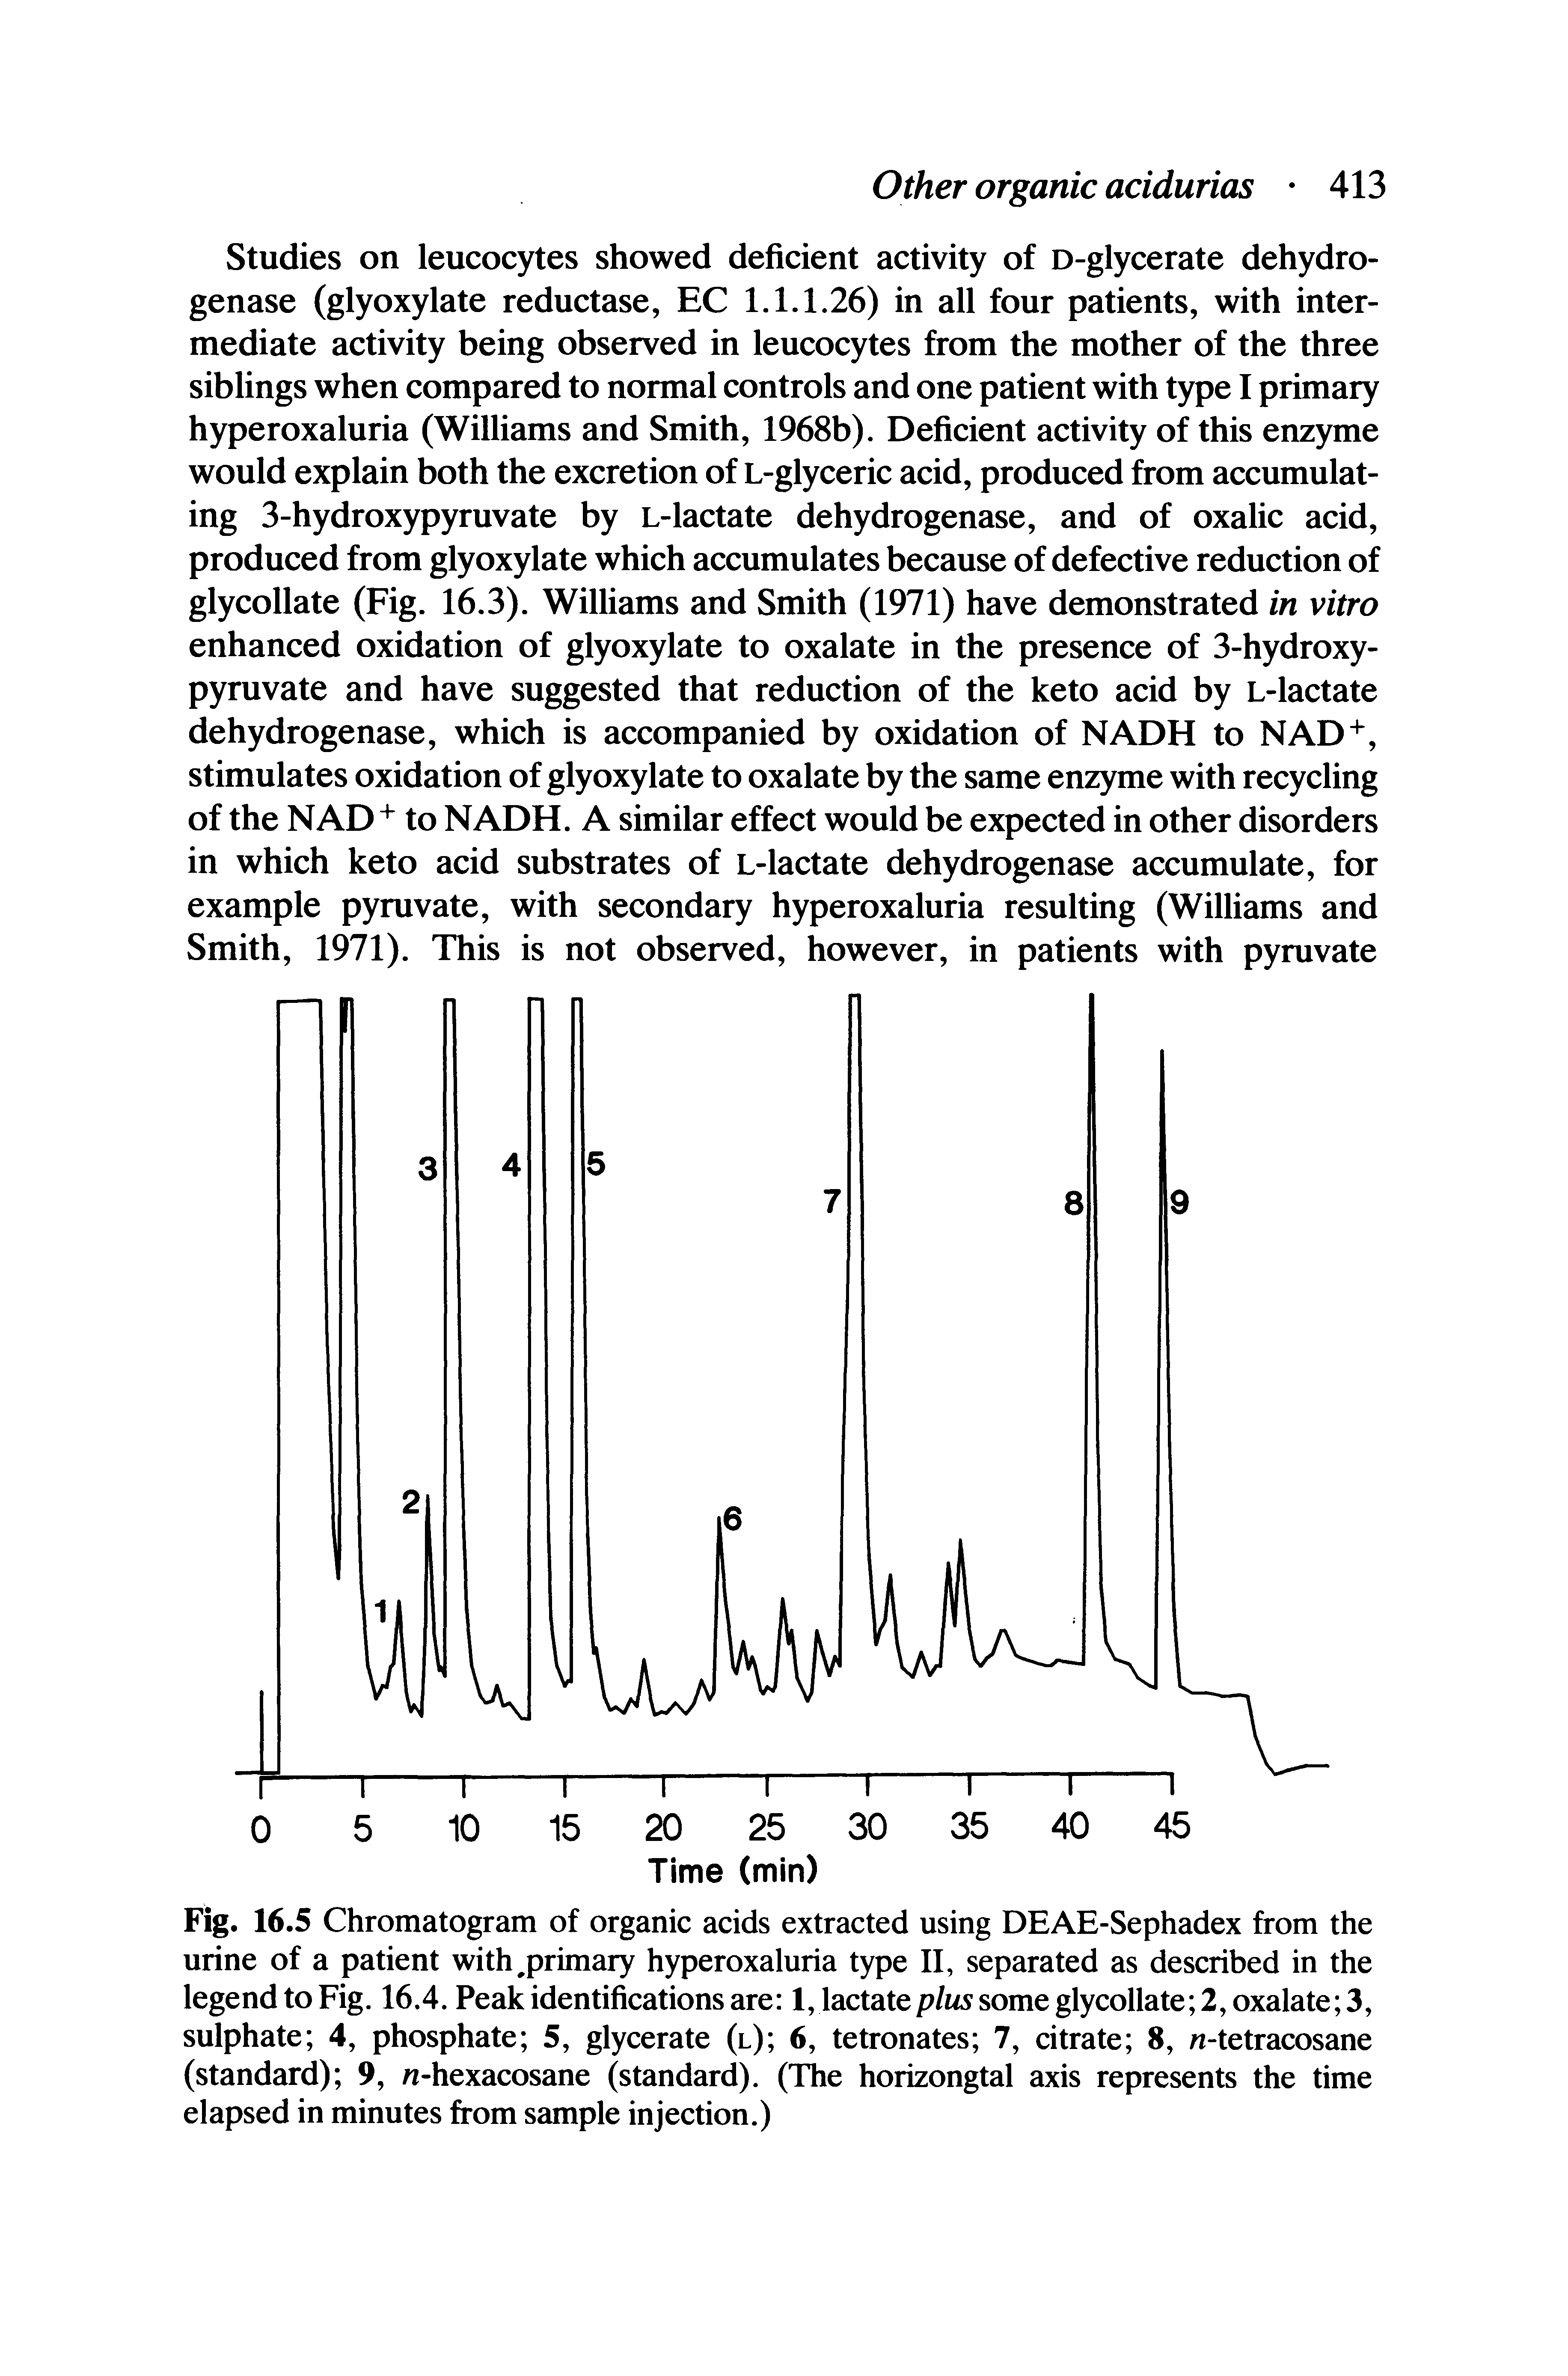 Fig. 16.5 Chromatogram of organic acids extracted using DEAE-Sephadex from the urine of a patient with,primary hyperoxaluria type II, separated as described in the legend to Fig. 16.4. Peak identifications are 1, lactate plus some glycollate 2, oxalate 3, sulphate 4, phosphate 5, glycerate (l) 6, tetronates 7, citrate 8, n-tetracosane (standard) 9, n-hexacosane (standard). (The horizongtal axis represents the time elapsed in minutes from sample injection.)...